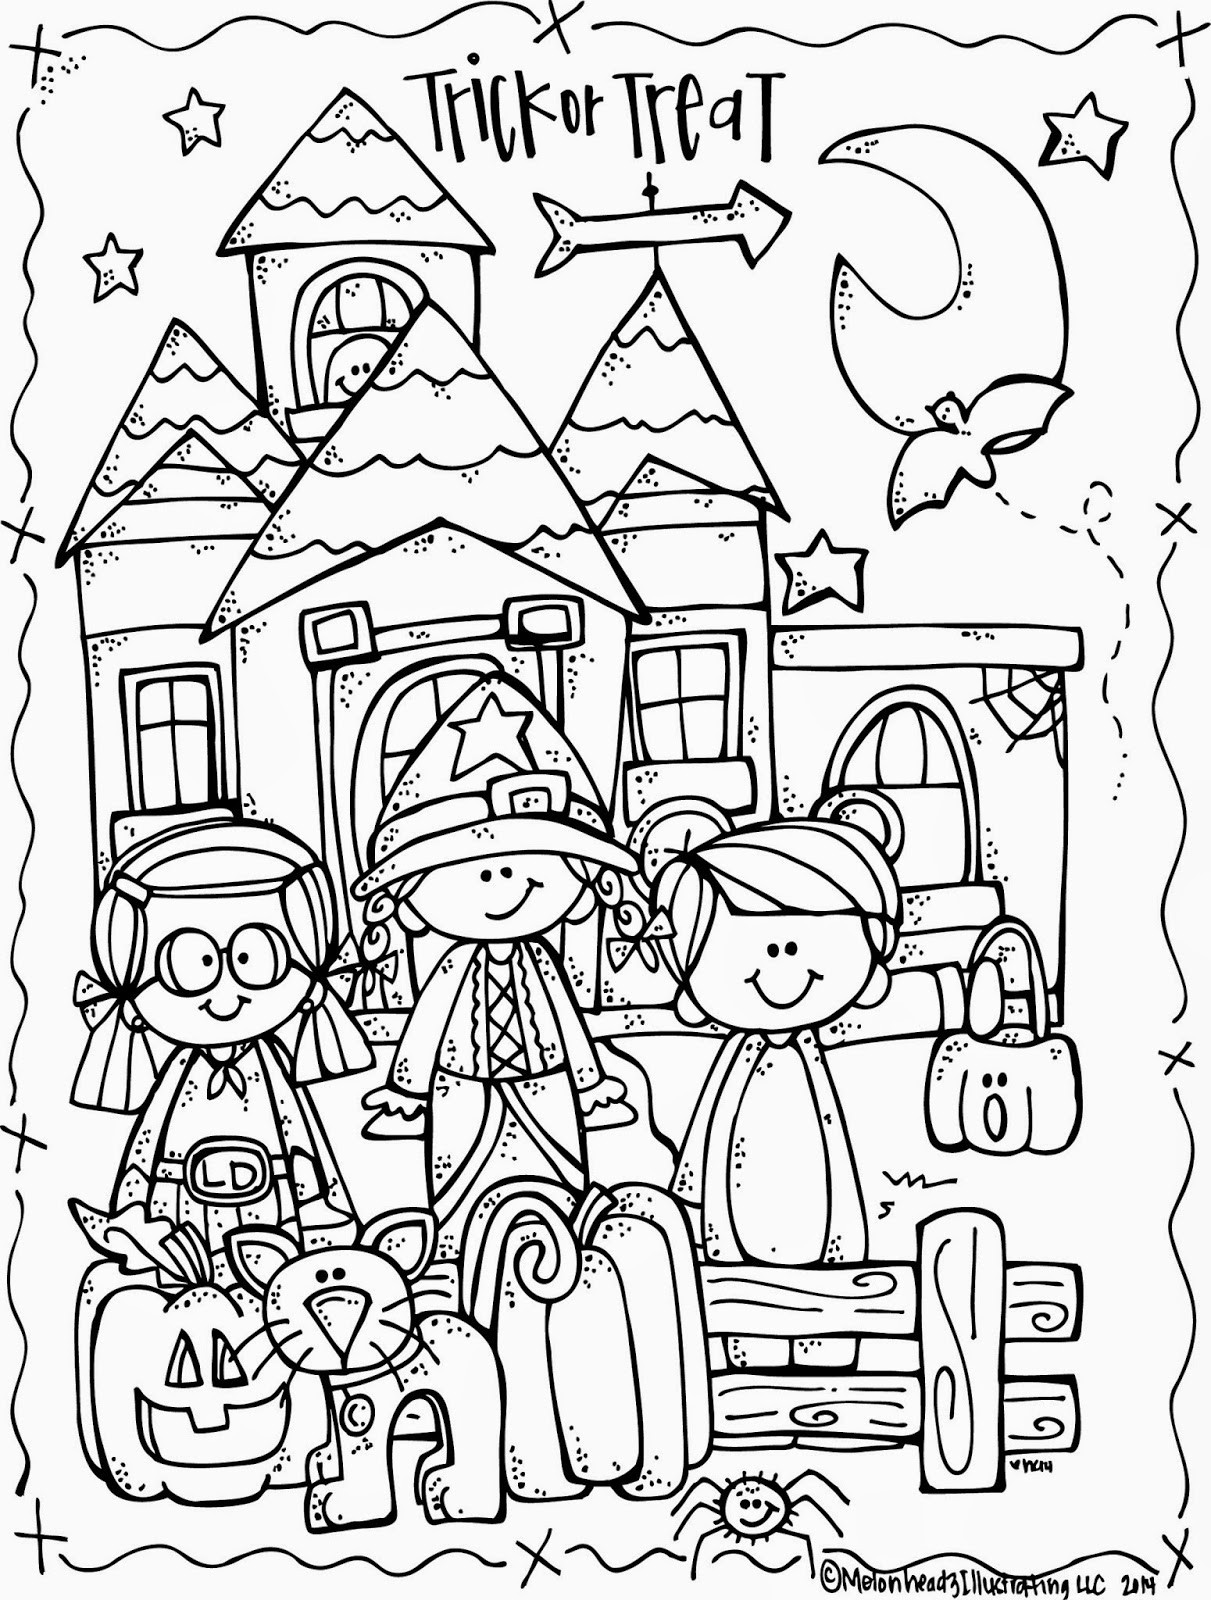 Halloween Coloring Pages Printable Free
 MelonHeadz Lucy Doris Halloween coloring page freebie